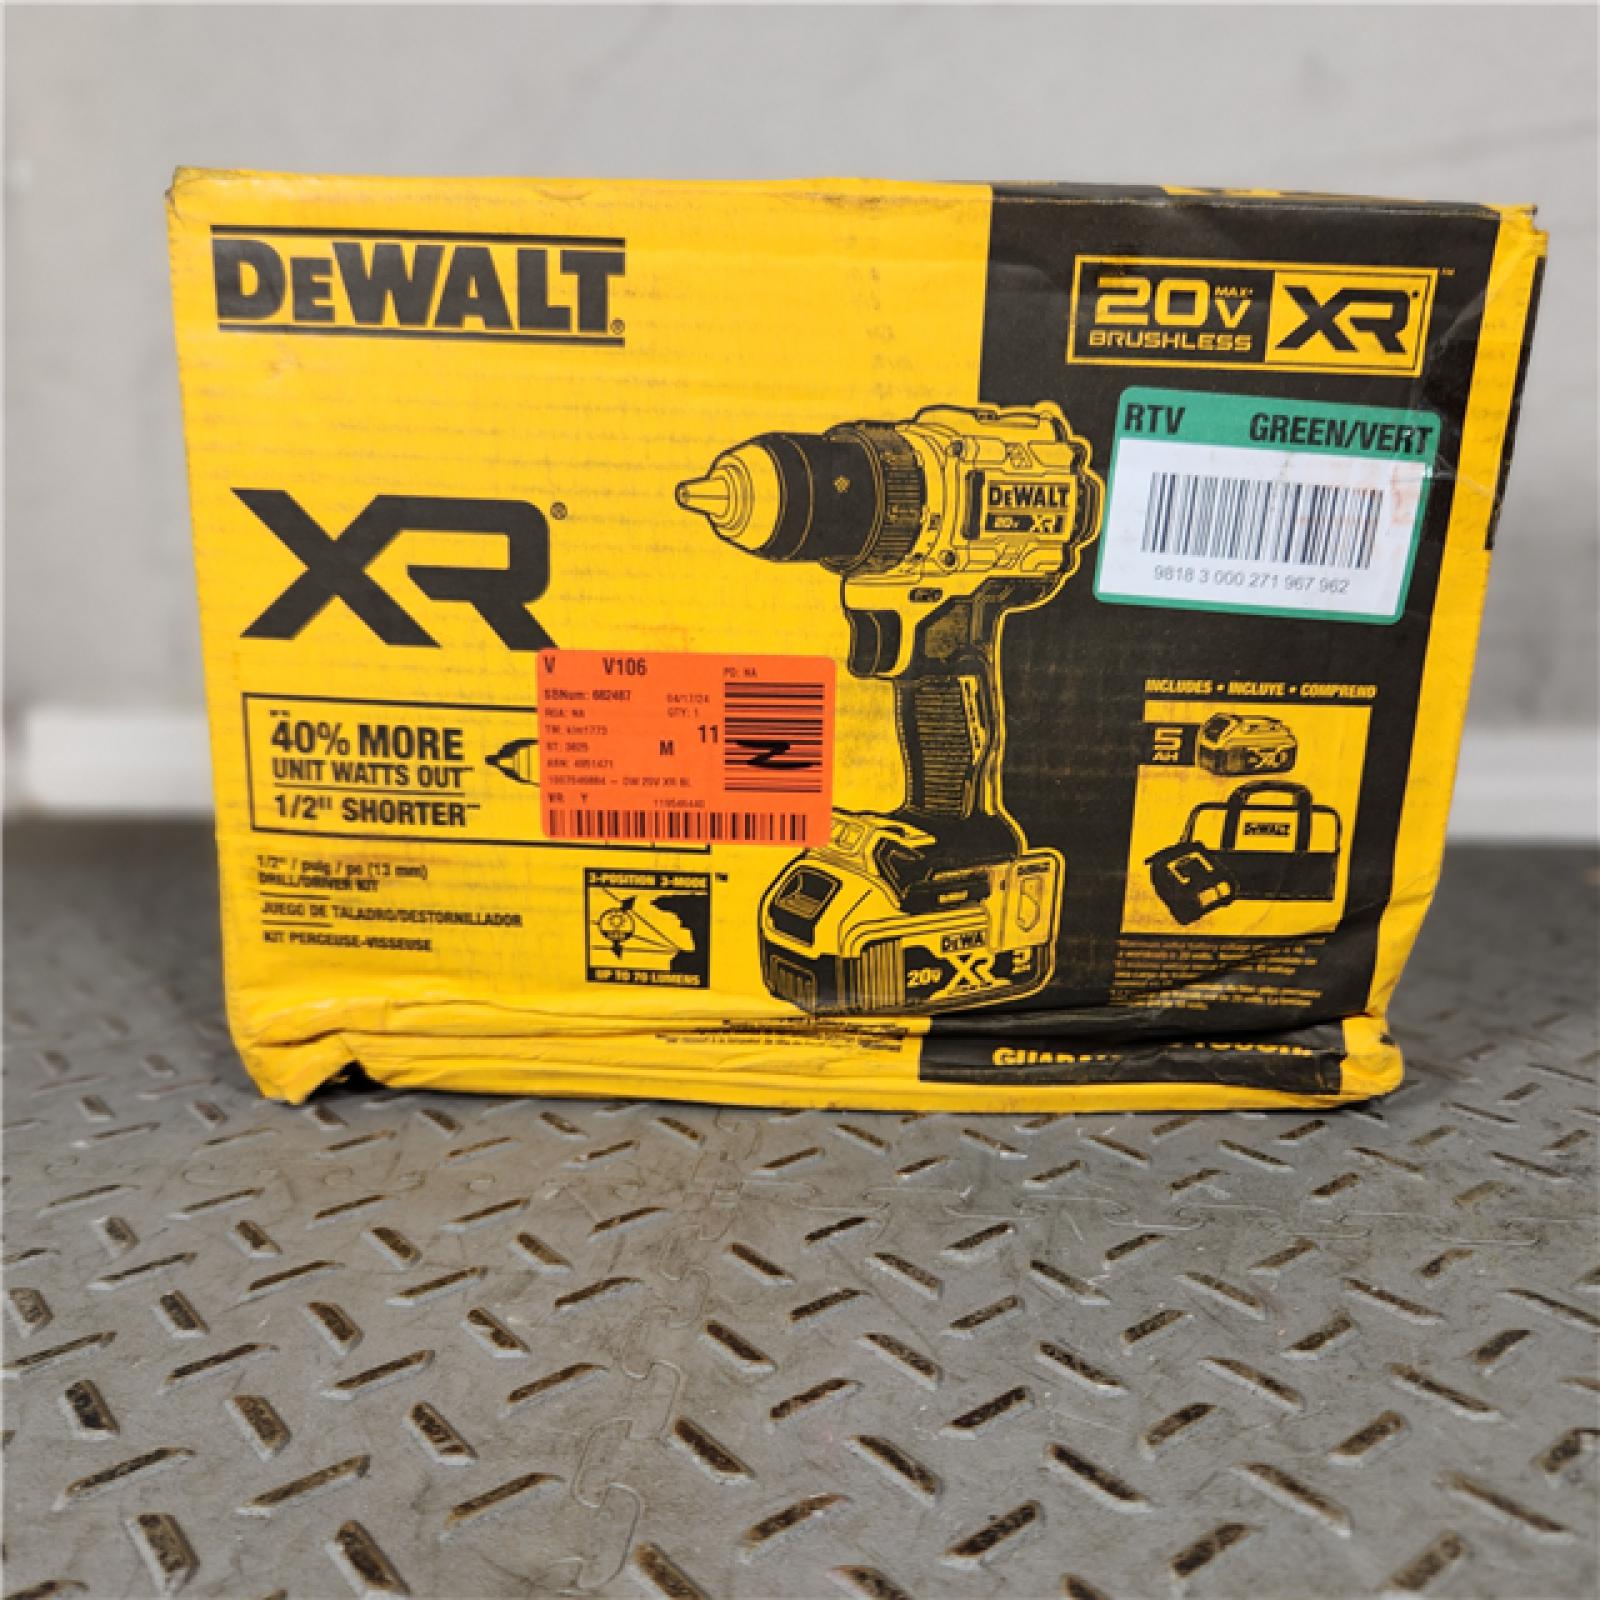 Houston Location - AS-IS DEWALT DCD800P1 20V MAX* XR Brushless Cordless Lithium-Ion 1/2 Drill/Driver KIT 5.0AH - Appears IN LIKE NEW Condition